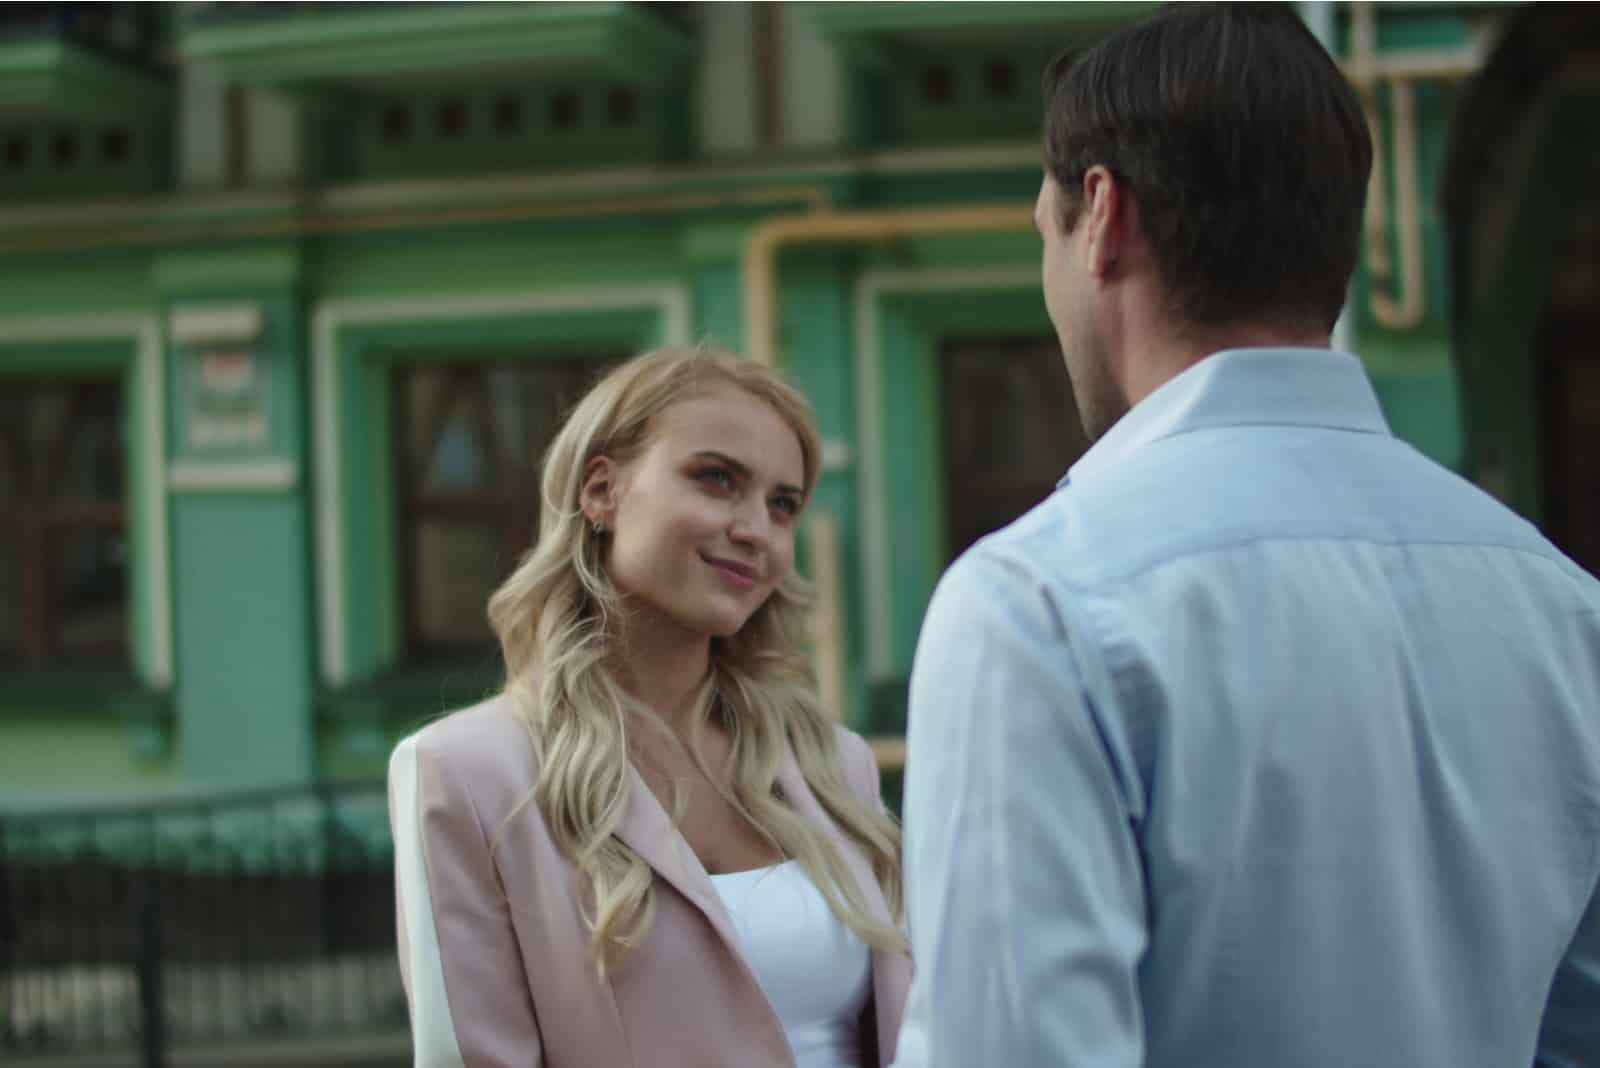 a blonde-haired woman stands on the street talking to a man